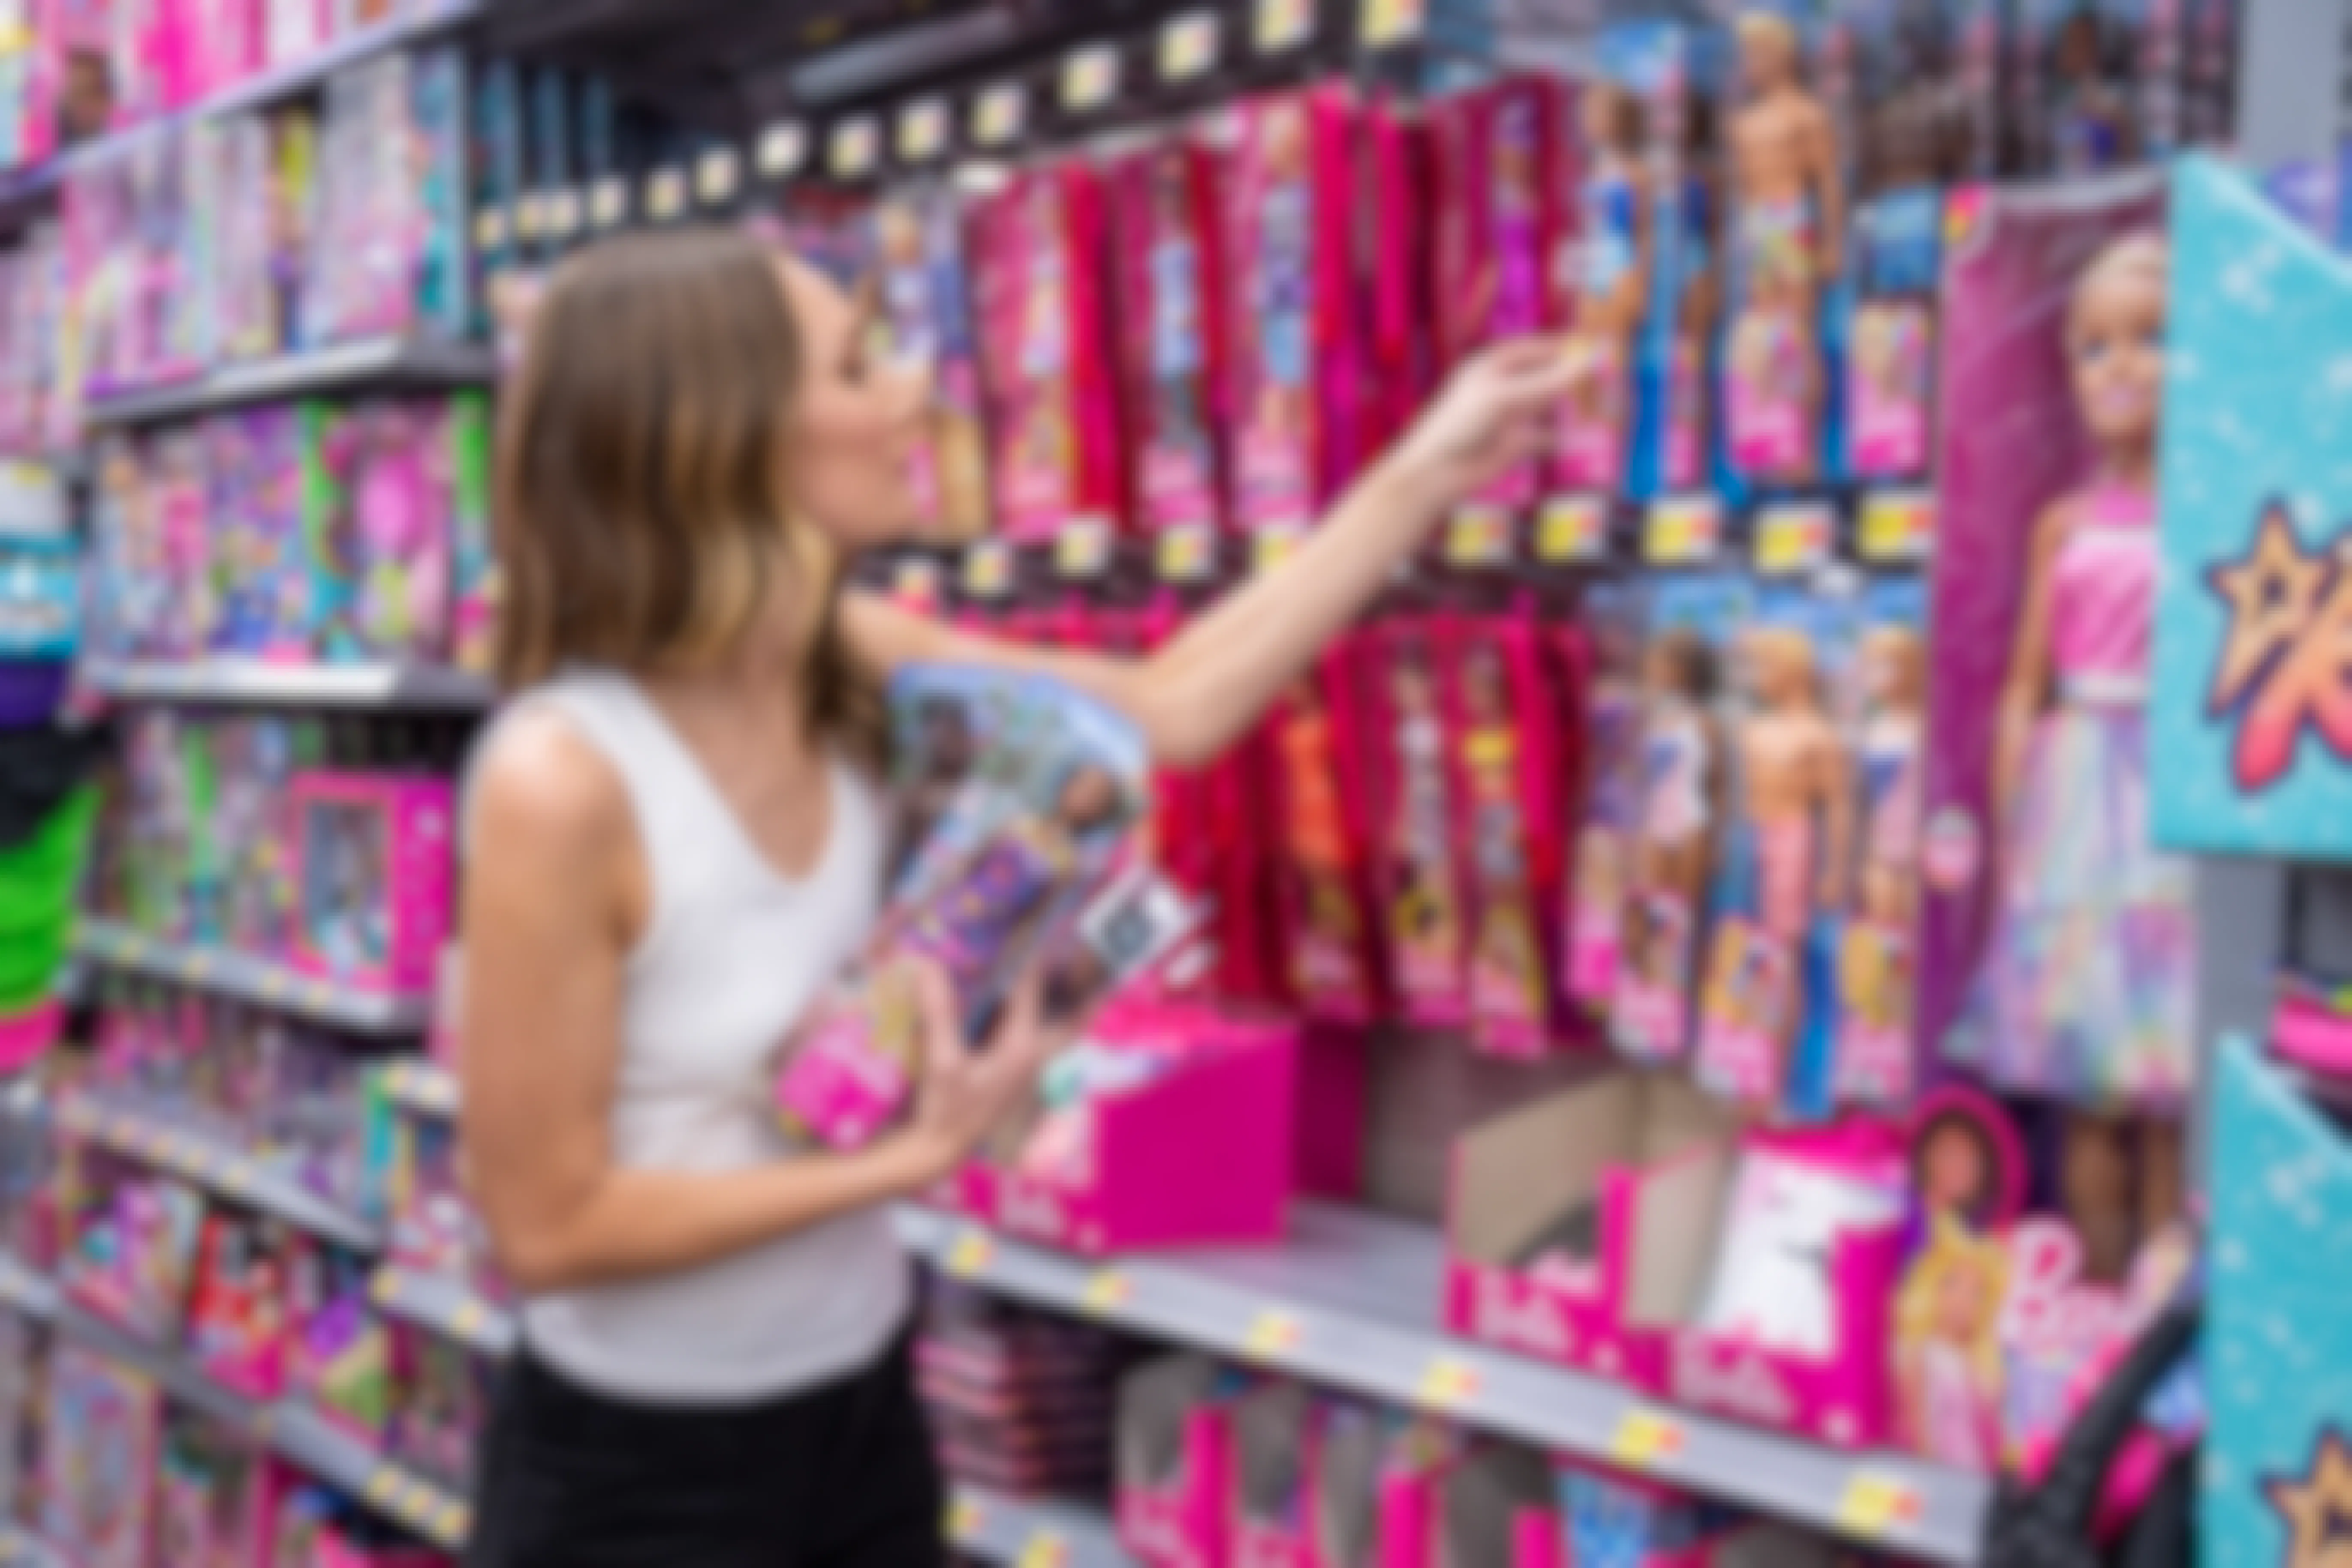 A woman reaching for barbie dolls hanging on the shelf at Walmart